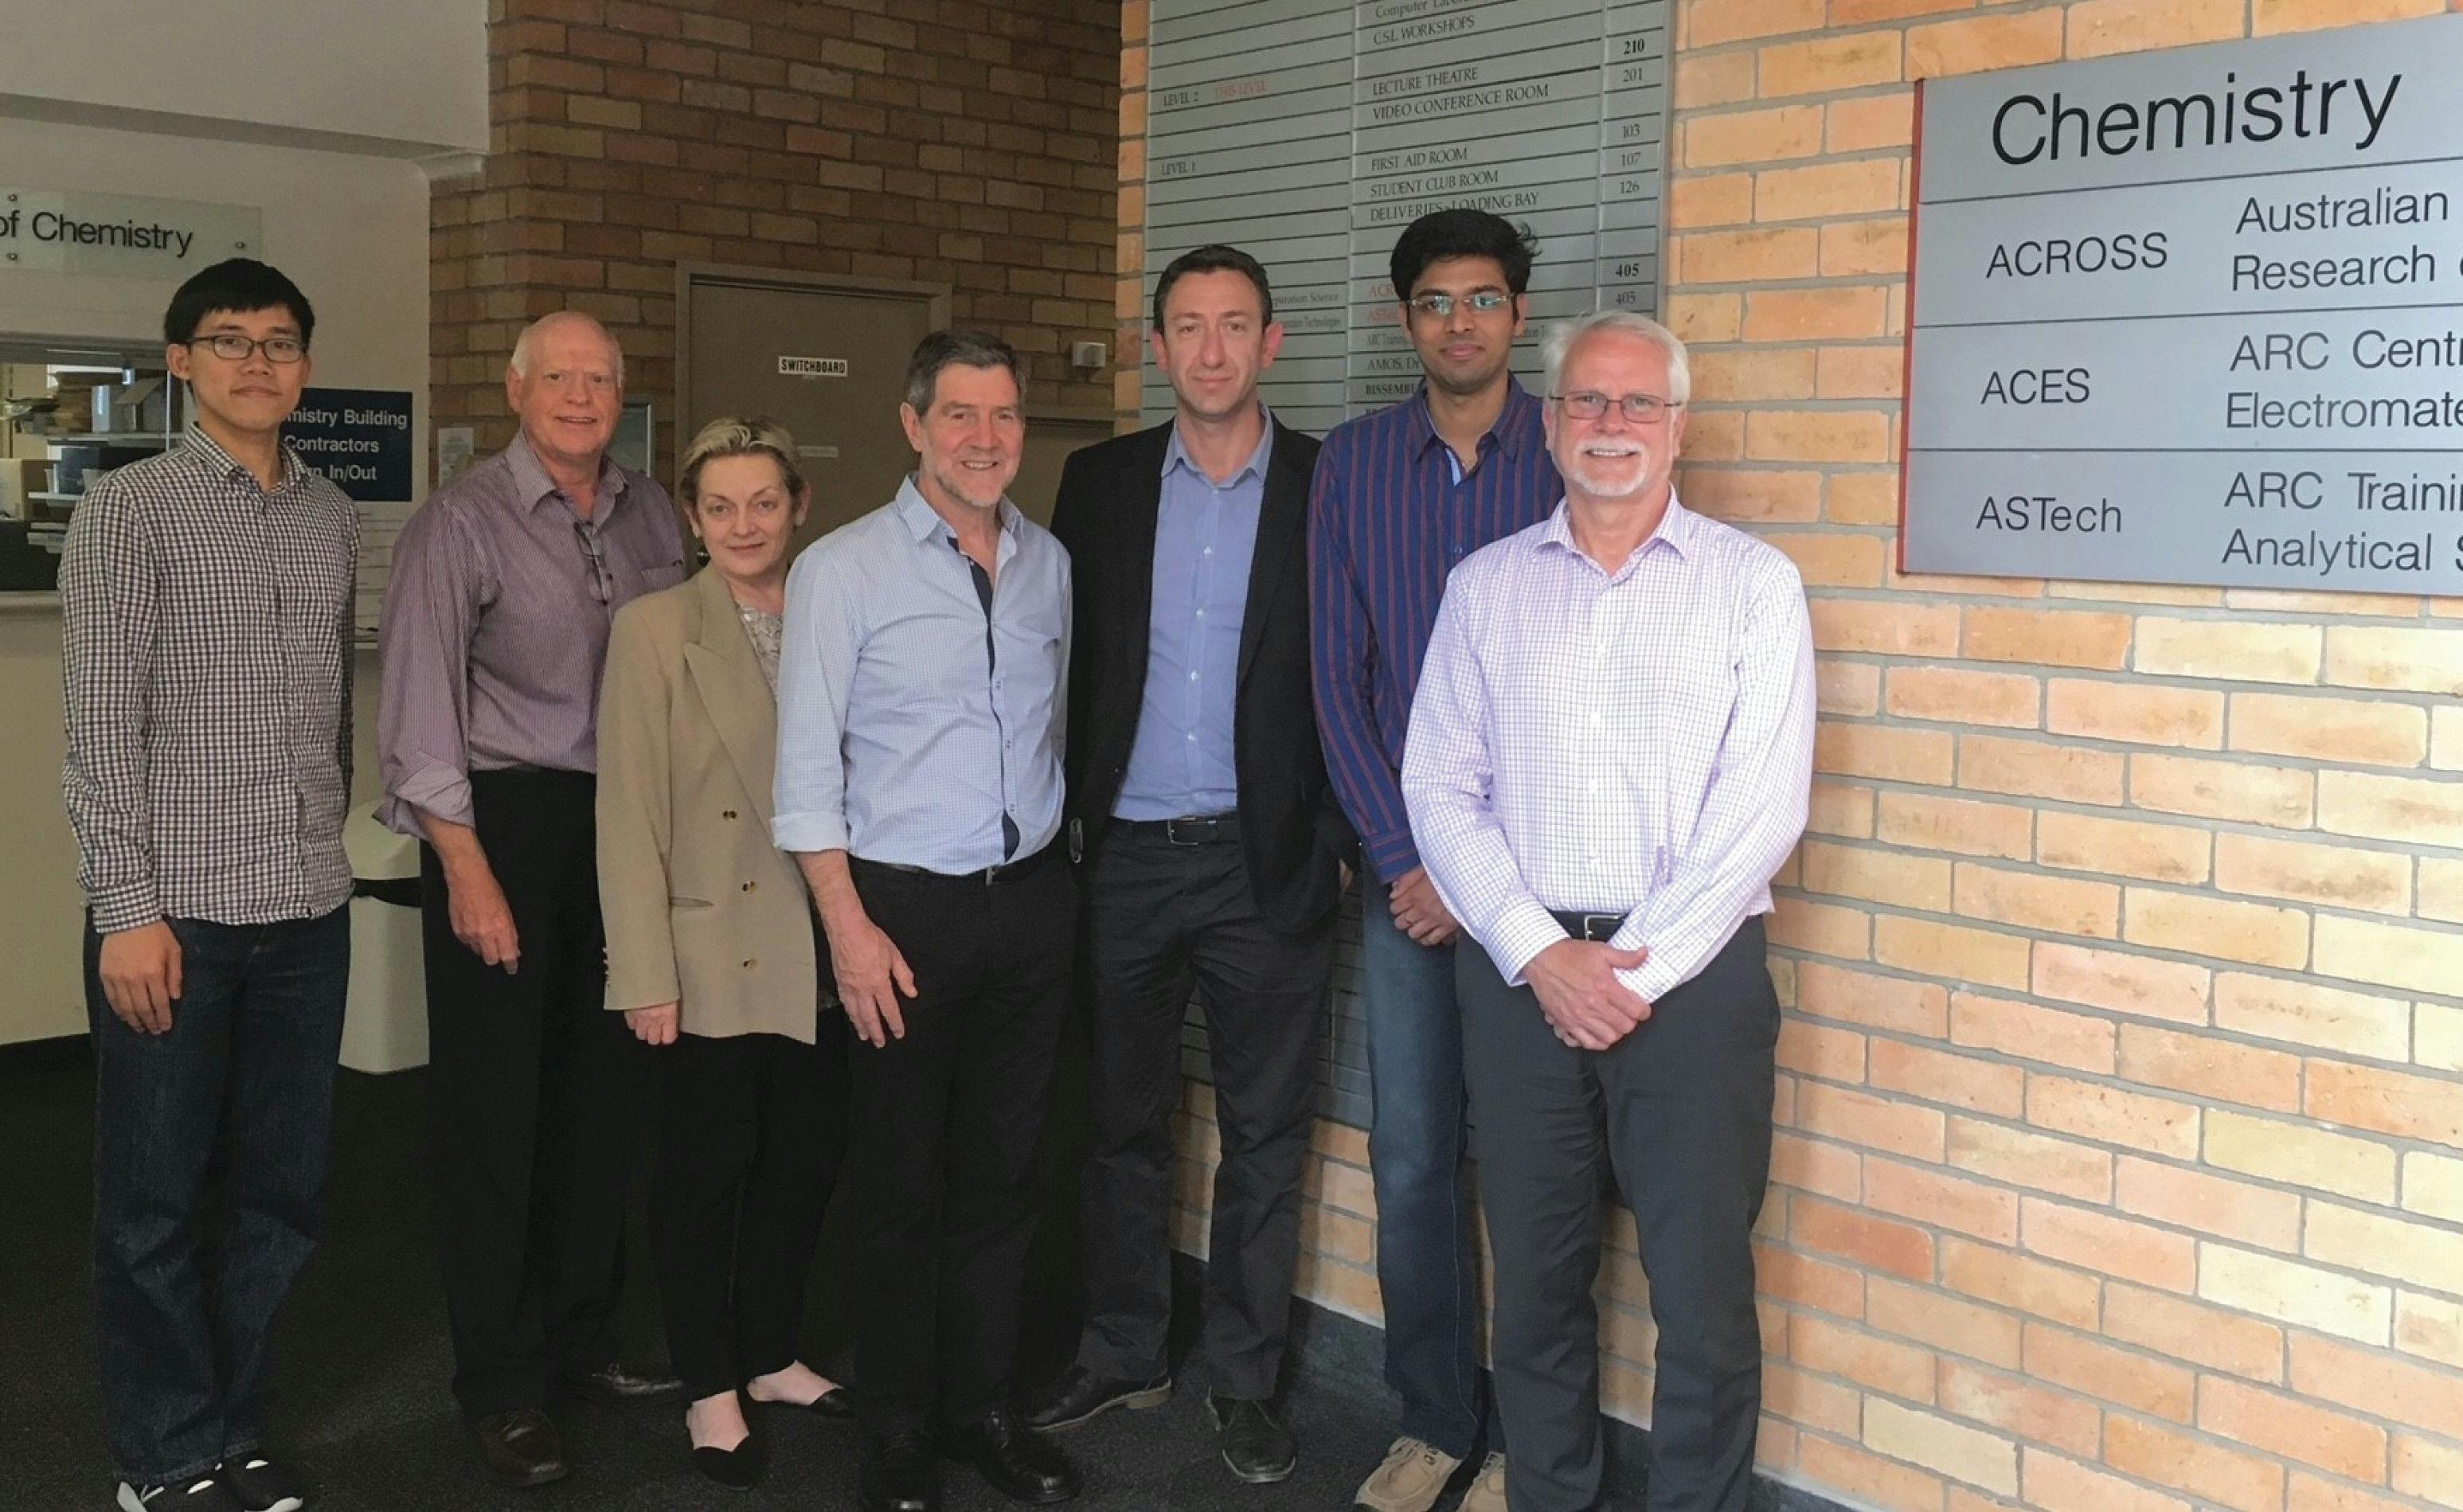 Professor Haddad with long-term industry collaborators and PhD students working together with and within the Training Centre for Portable Analytical Separations Technology (ATech). From left; Mr. Shing Lam, Dr. Steve Hammond, Dr. Sonja Sekulic, Professor Paul Haddad, Professor Brett Paull, Mr. Lewellwyn Coates, and Dr. Andrew Gooley. Image and caption courtesy of Brett Paull.